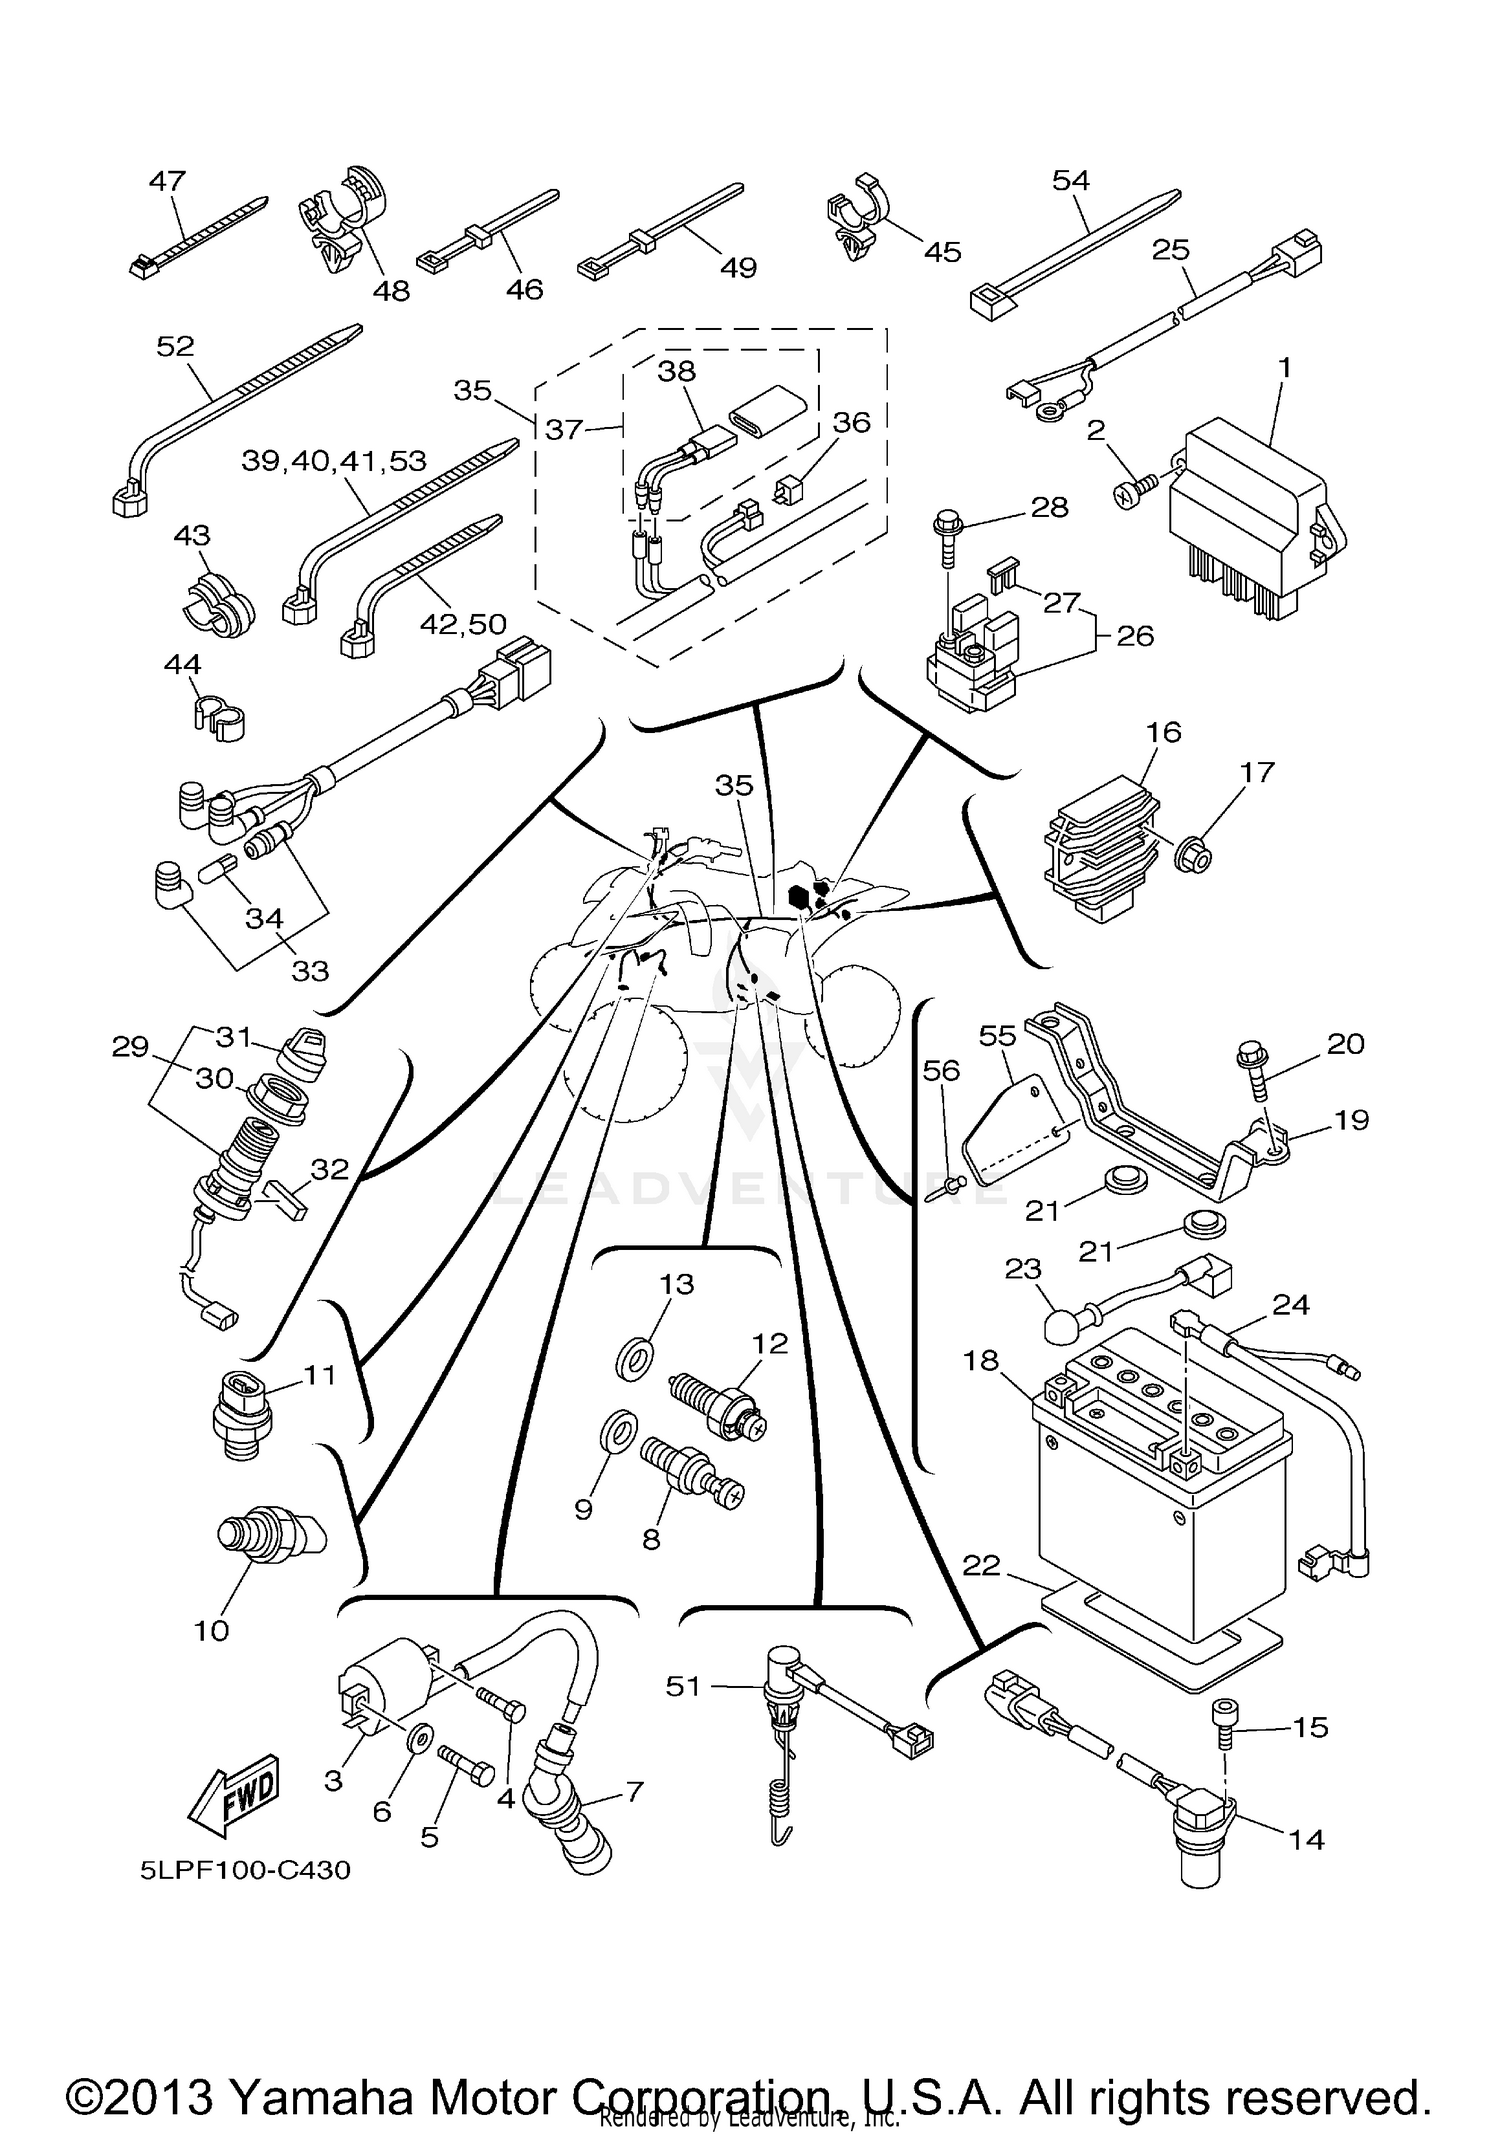 2004 Yamaha Raptor 660r Yfm660rs Electrical 1 Parts Oem Diagram For Motorcycles